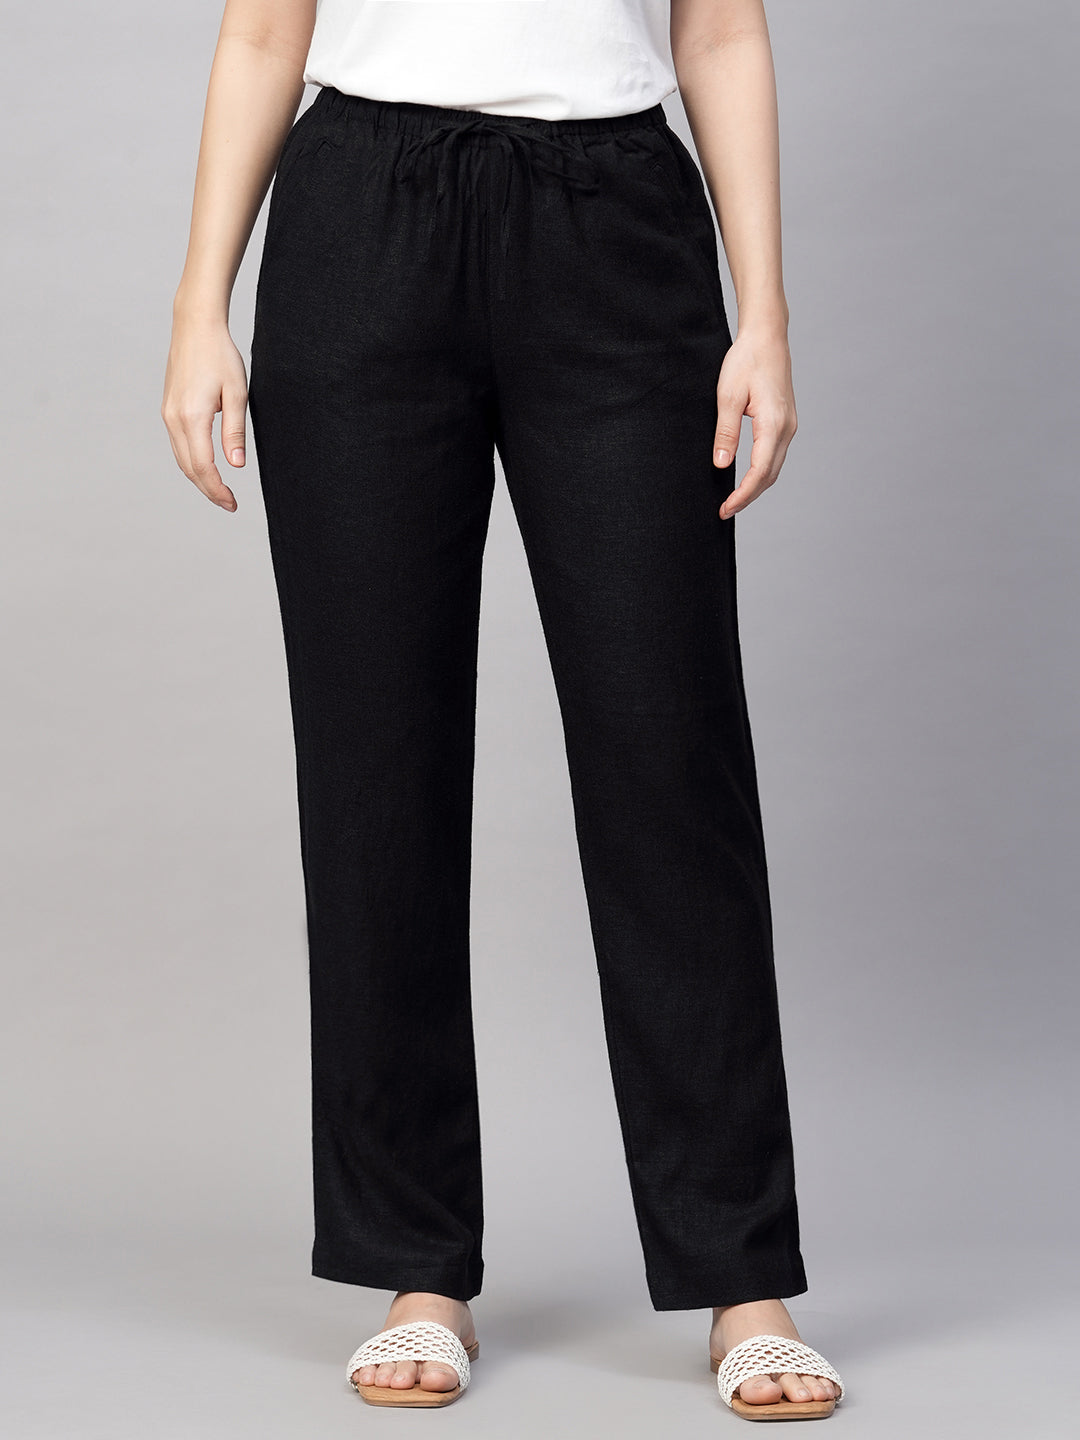 Buy Linen Pants for Women Online at an Amazing Price